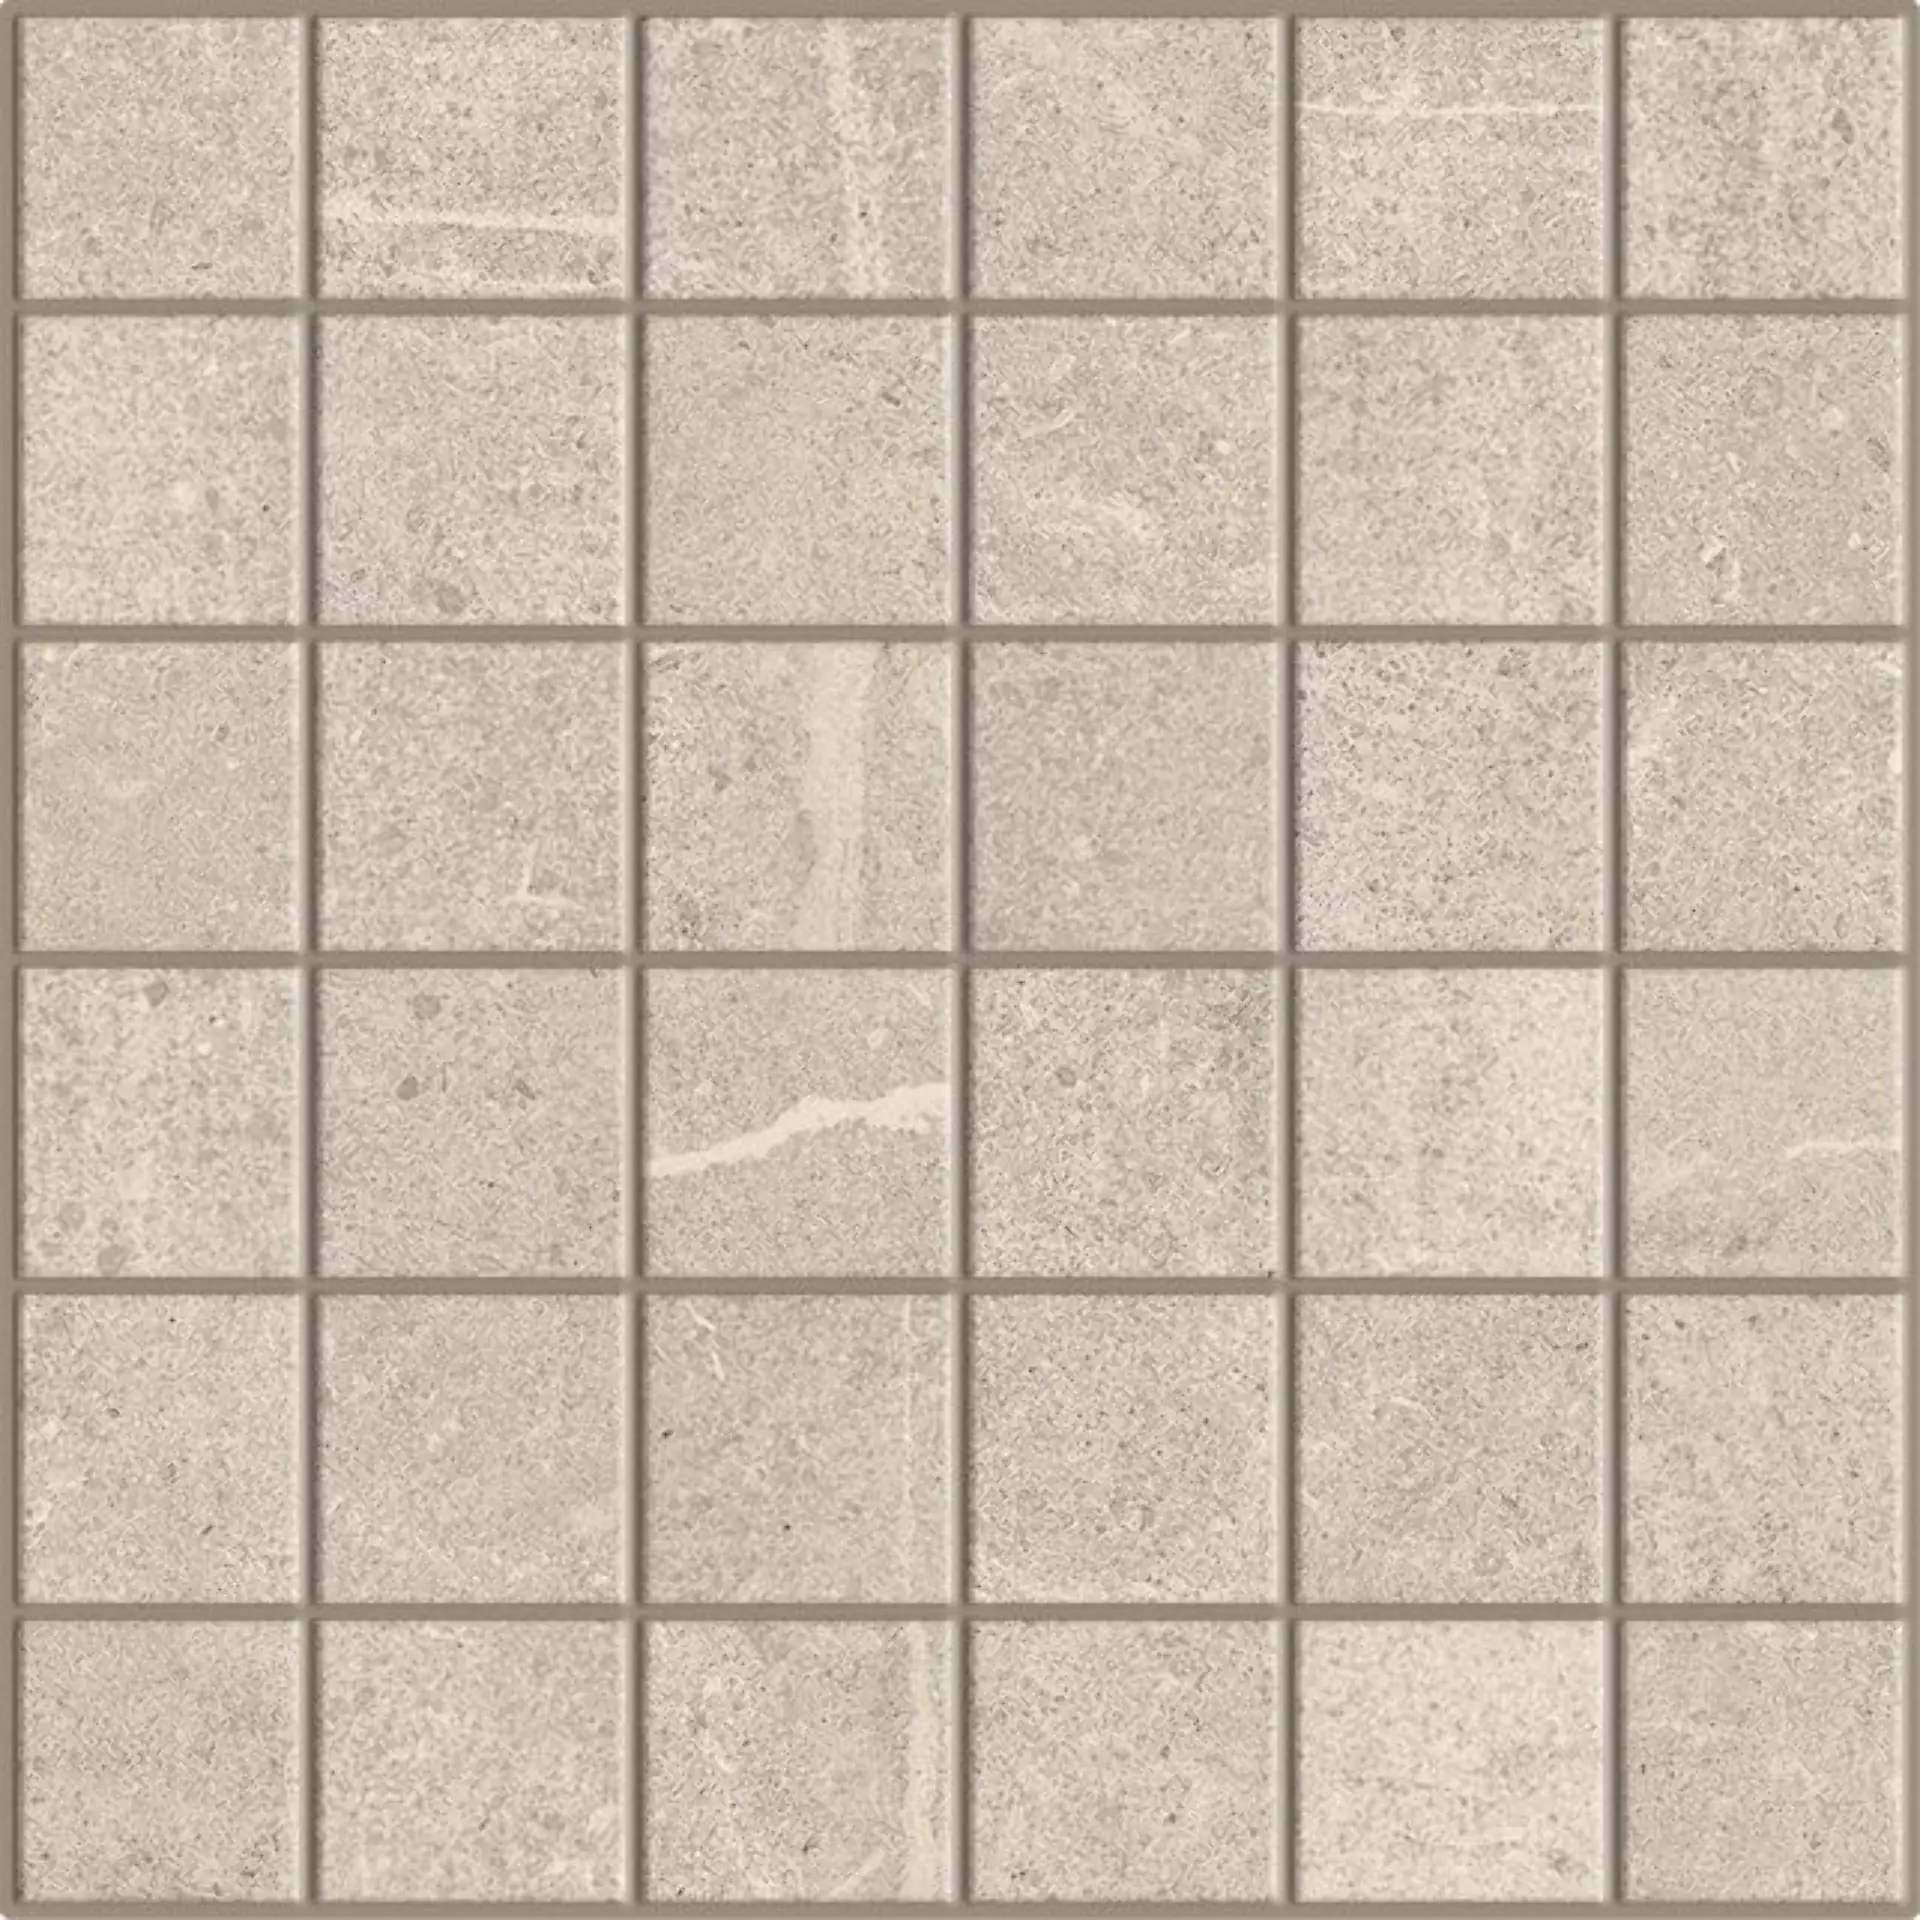 Century Uptown Morningside Naturale Mosaic (4,7x4,7) 0094577 30x30cm rectified 9mm